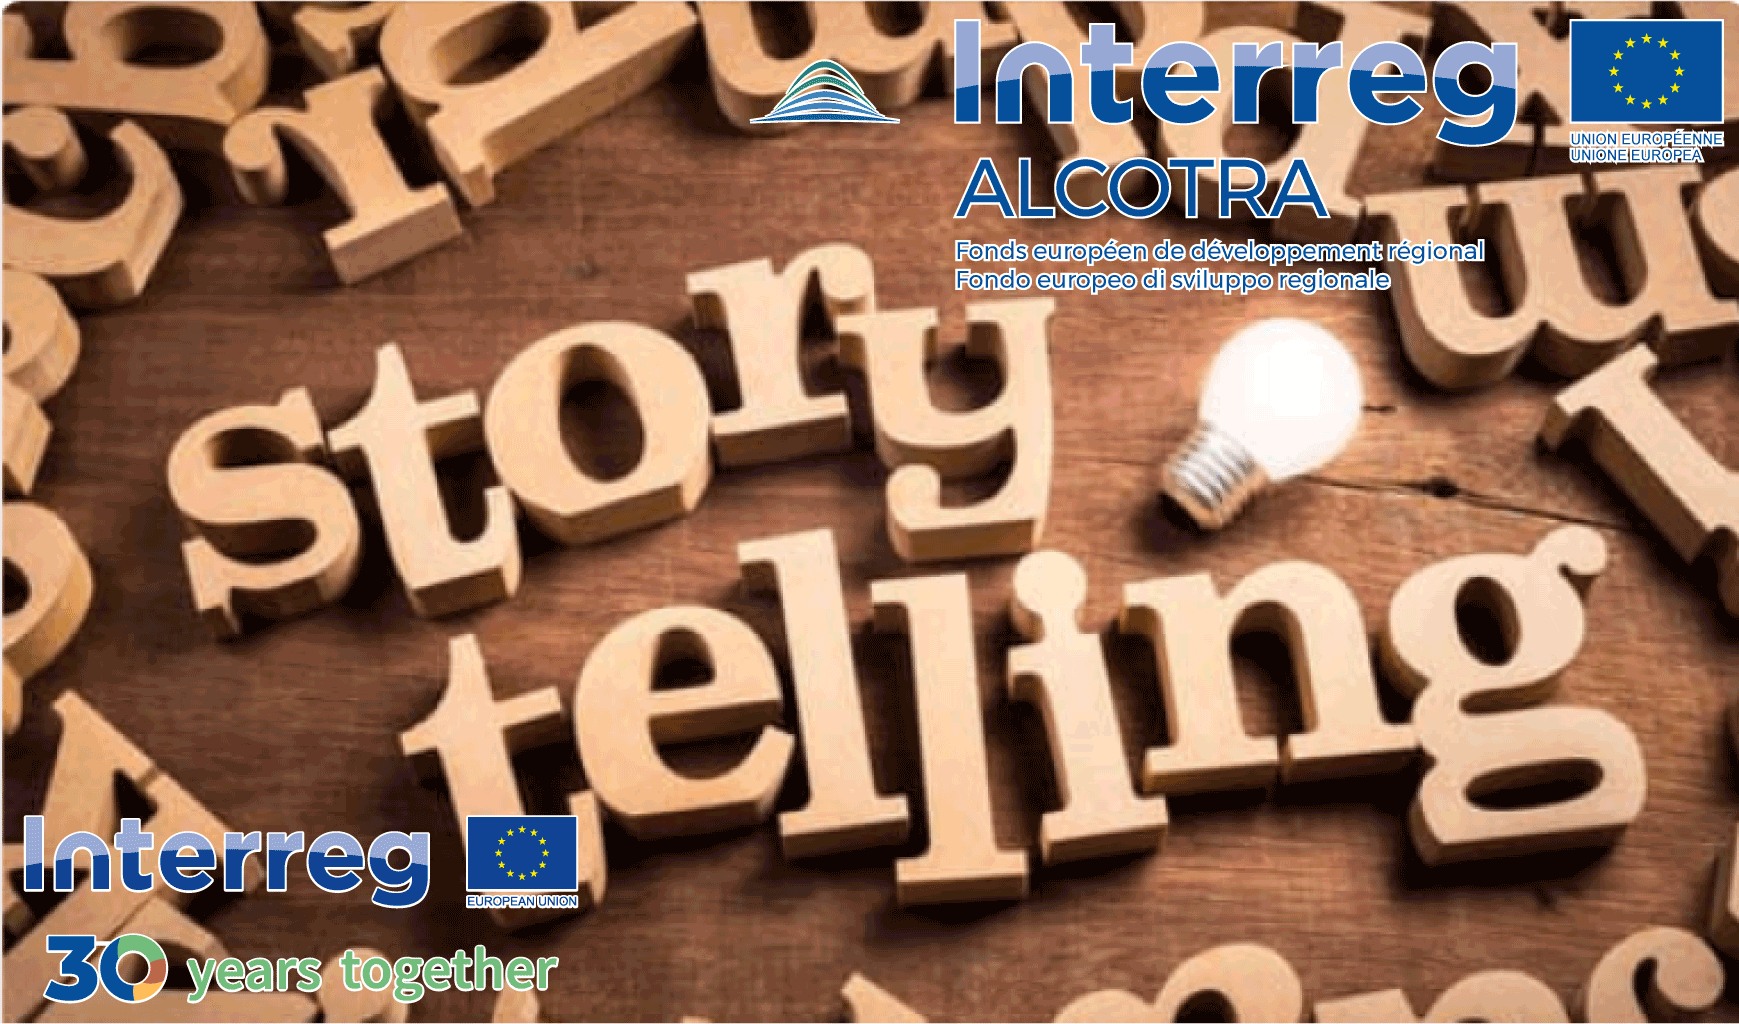 ALCOTRA storyelling contest